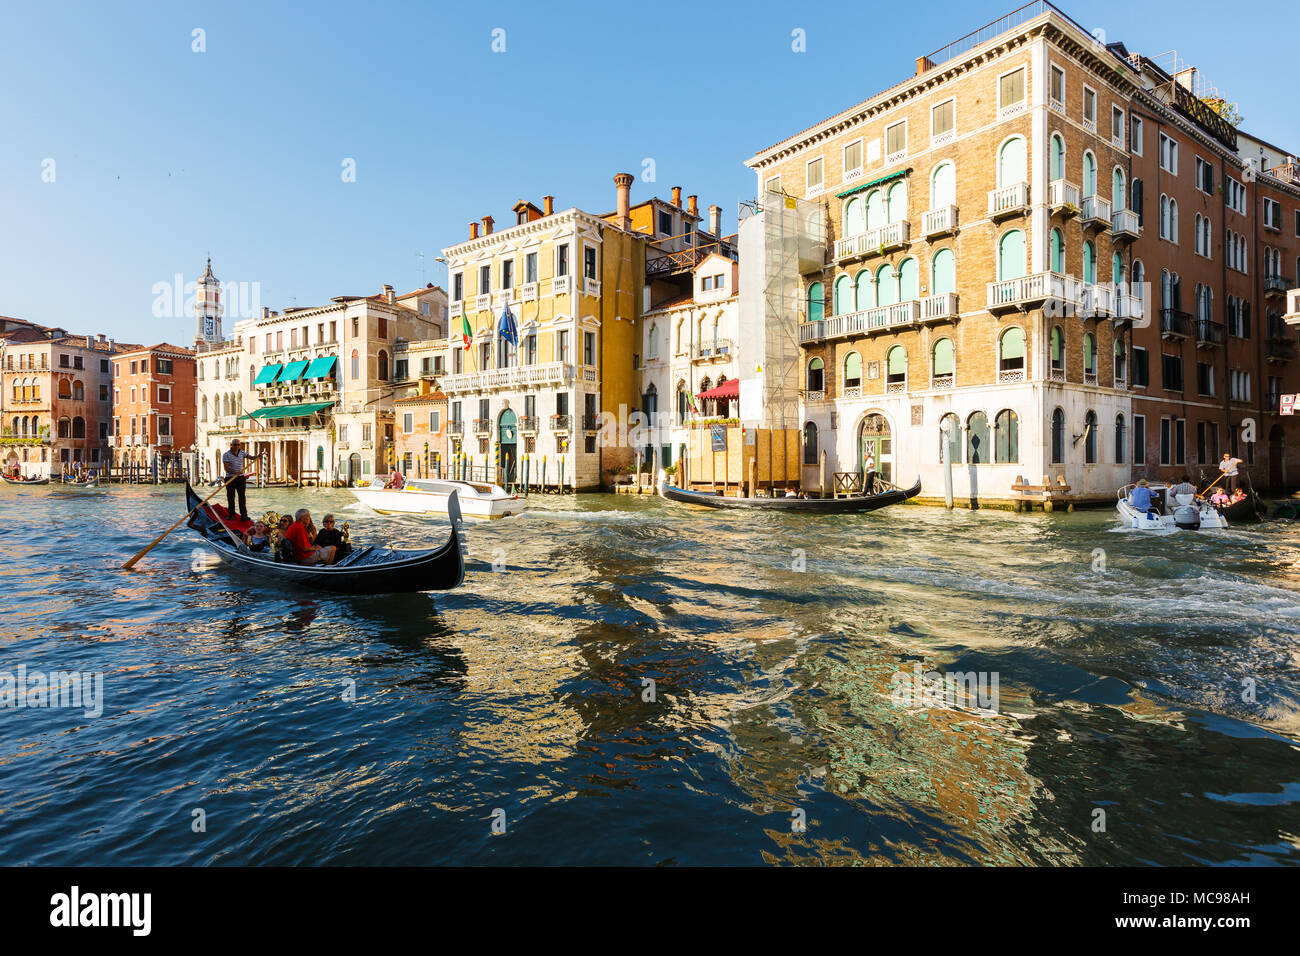 Venice, Italy - June, 21, 2013: Typical view to Venice city, to Grand canal, many tourists people enjoy a rest on gondolas and pleasure boat. Campanil Stock Photo